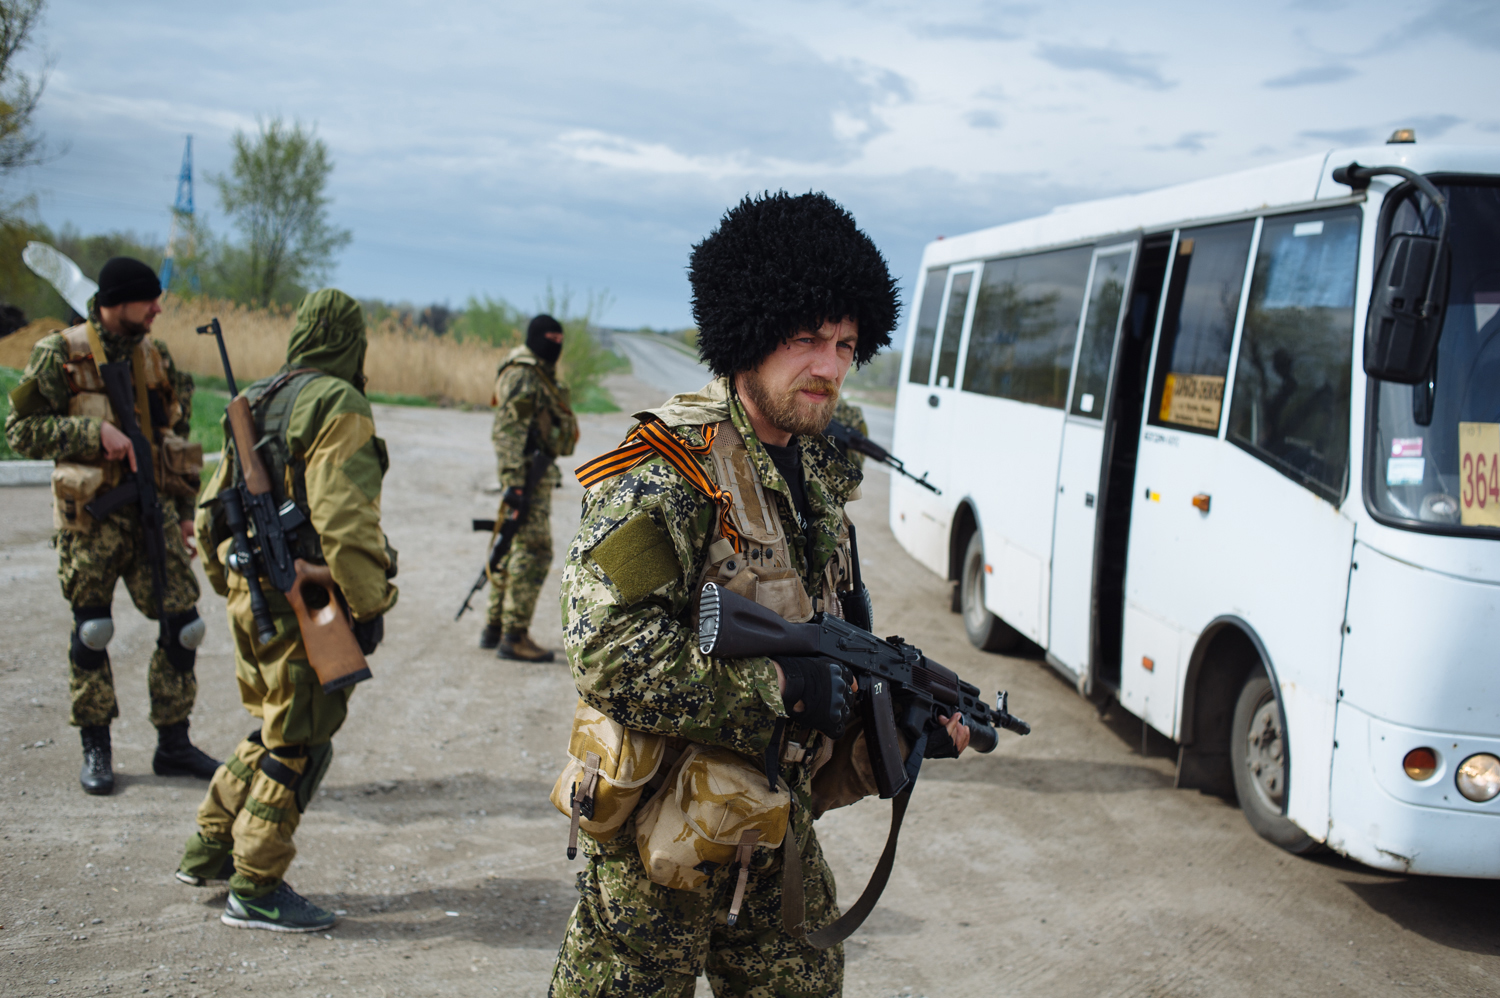 The Russian paramilitary group known as the Wolves' Hundred, with their commander Evgeny Ponomaryov in the foreground, block the road near the checkpoint not far from Slavyansk, in eastern Ukraine, April 20, 2014 (Maxim Dondyuk)